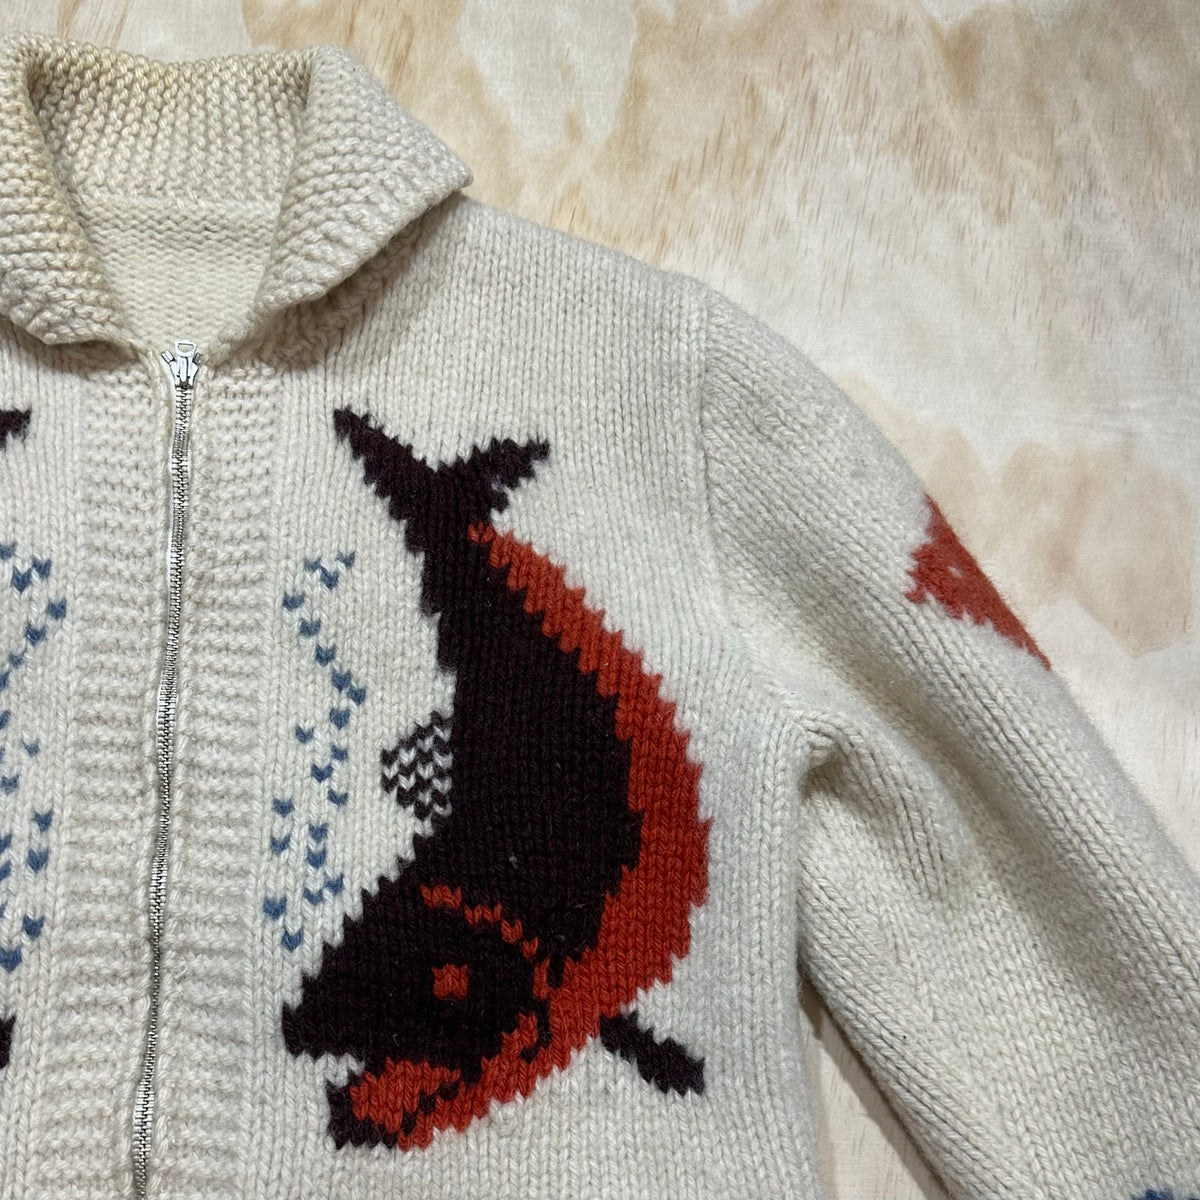 Vintage 1960's Mary Maxim Fish Cowichan Hand Knit Wool Sweater